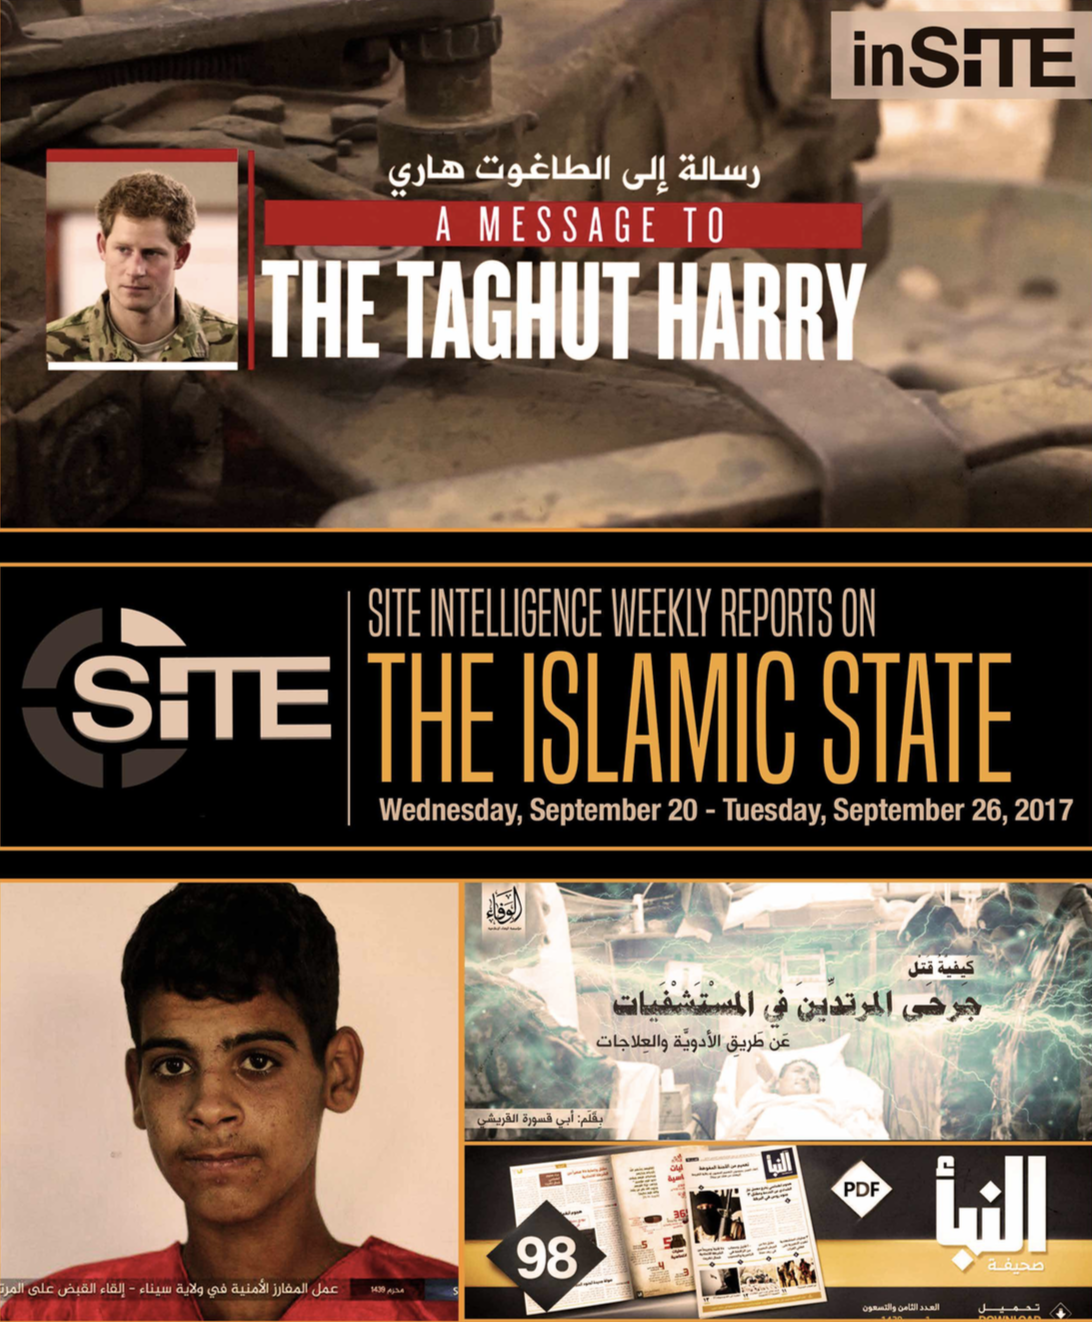 Weekly inSITE on the Islamic State, September 20-26